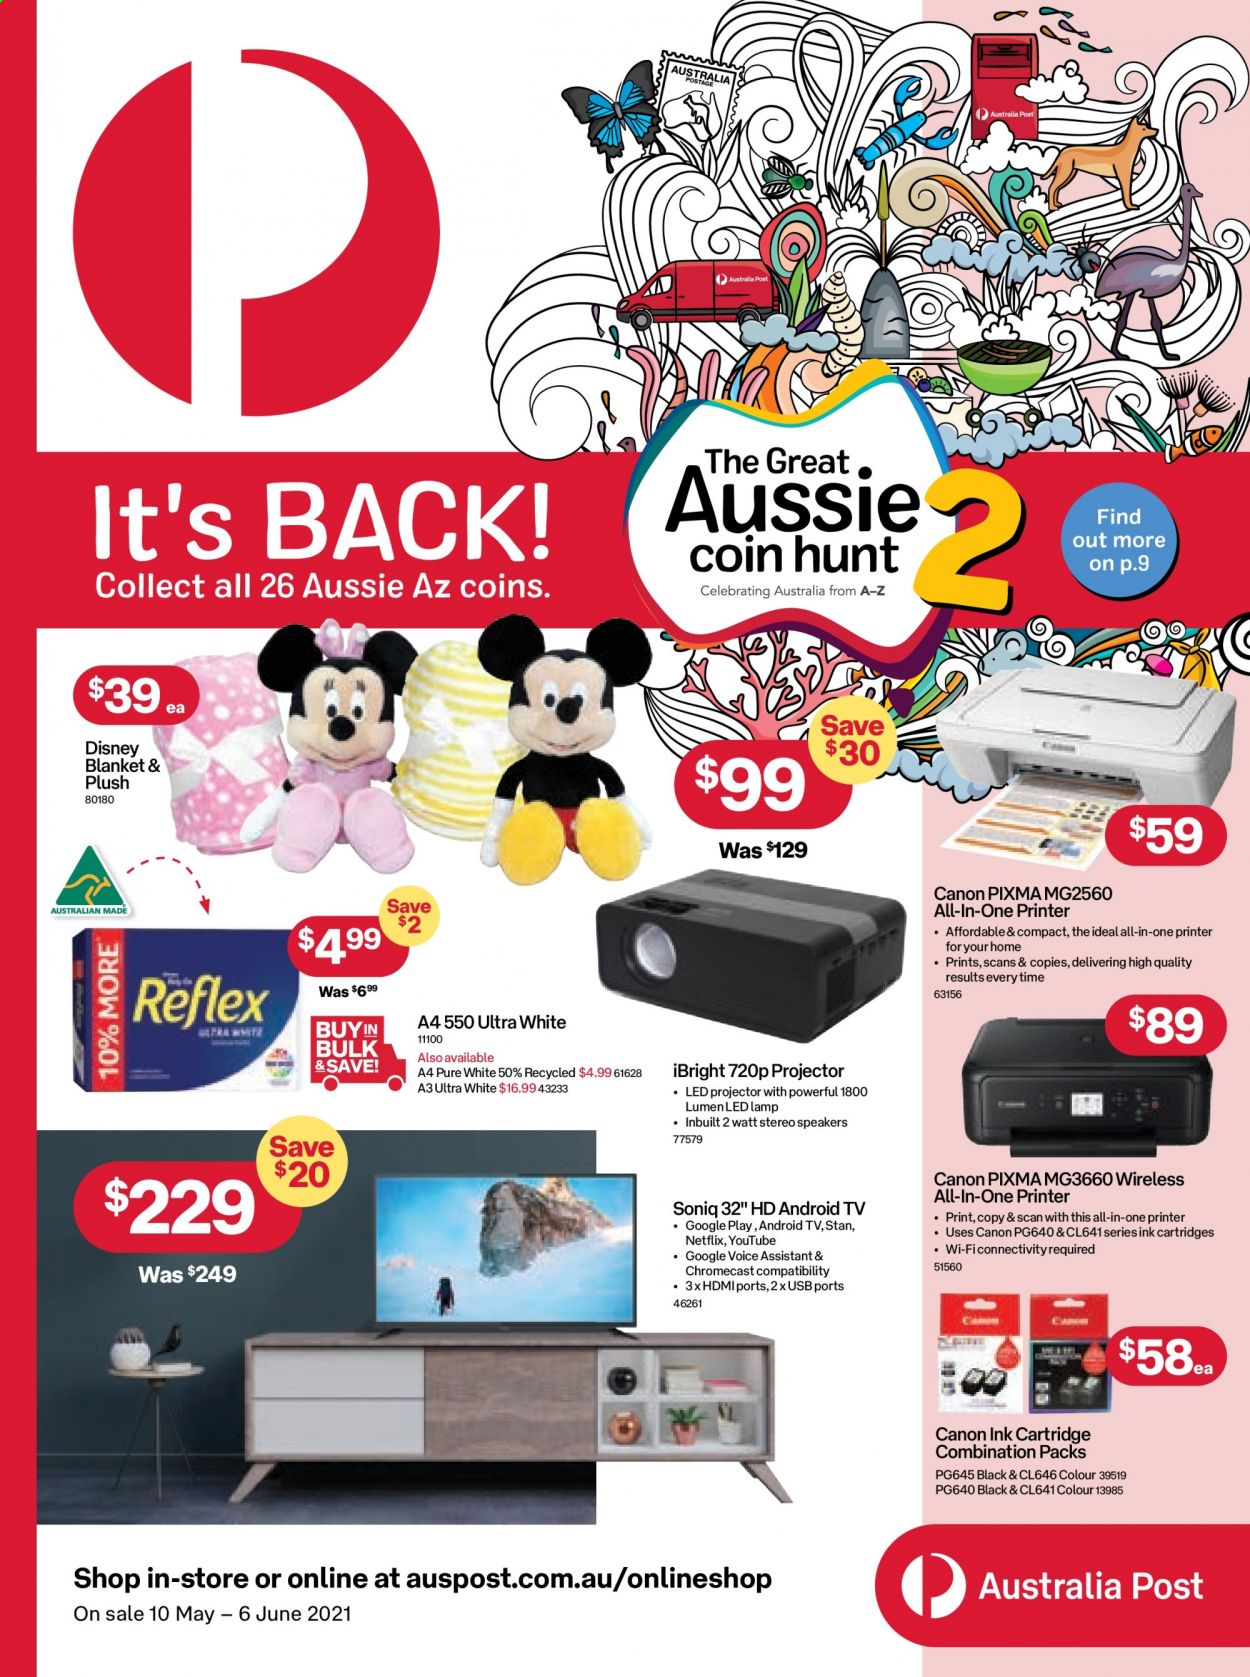 thumbnail - Australia Post Catalogue - 10 May 2021 - 6 Jun 2021 - Sales products - Aussie, Disney, blanket, Canon, Android TV, TV, projector, speaker, Google Chromecast, all-in-one printer, printer, cartridge, lamp. Page 1.